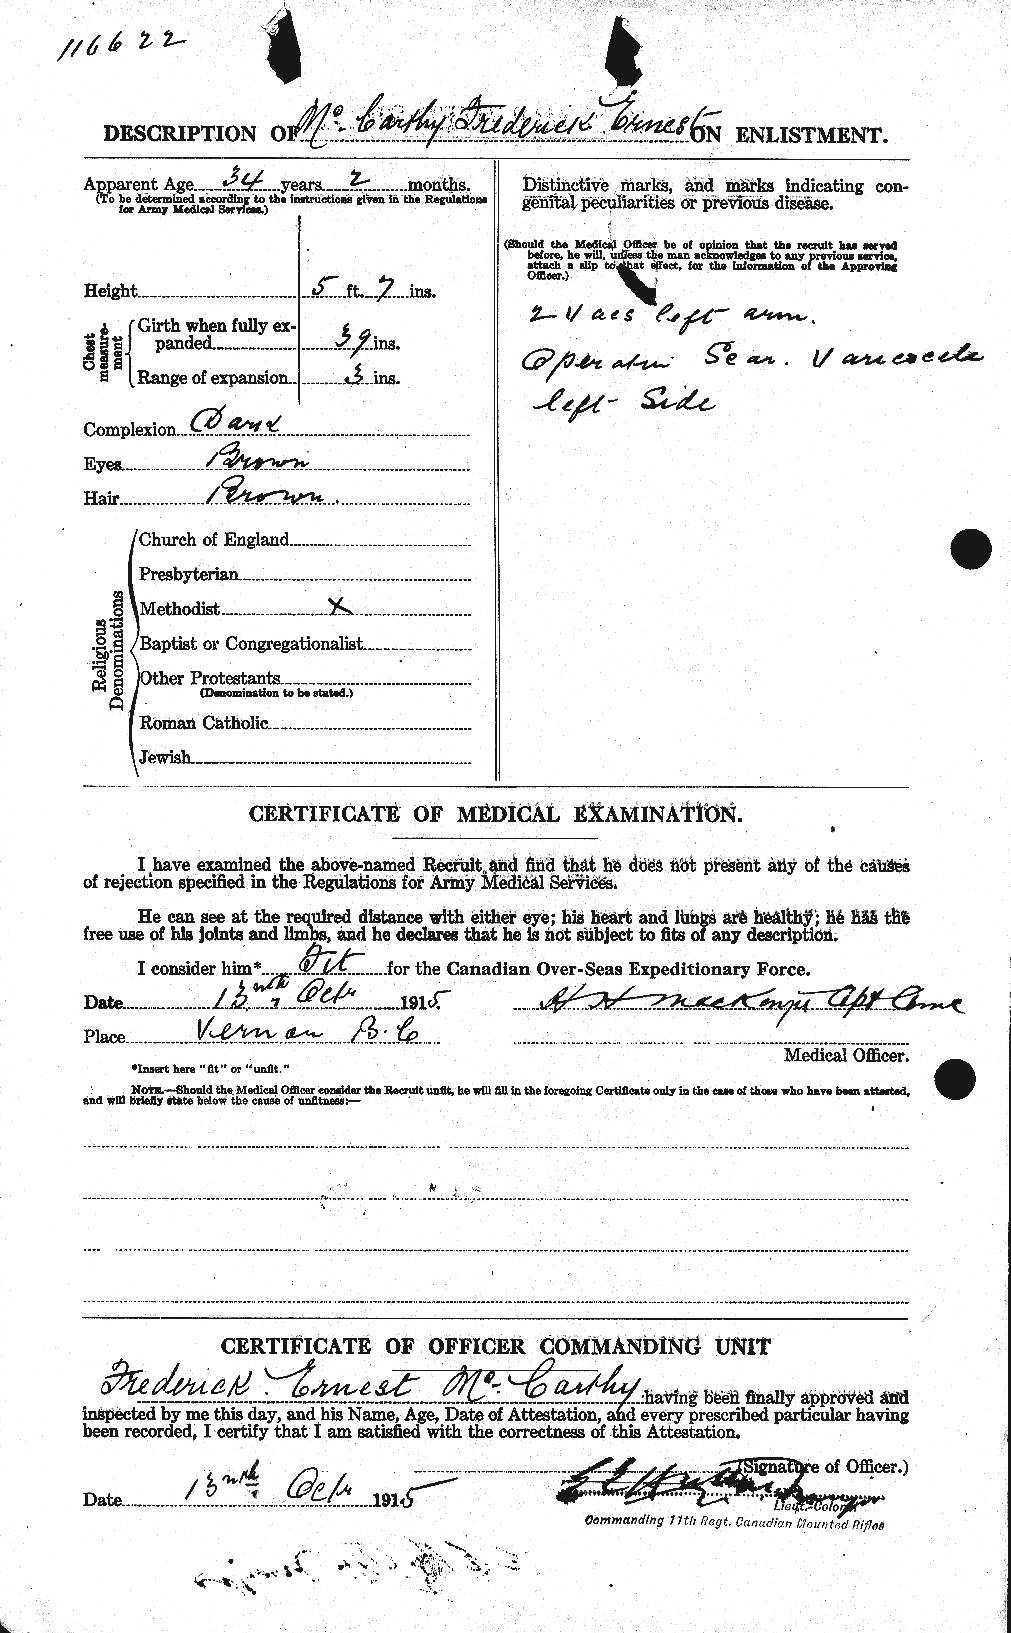 Personnel Records of the First World War - CEF 132234b